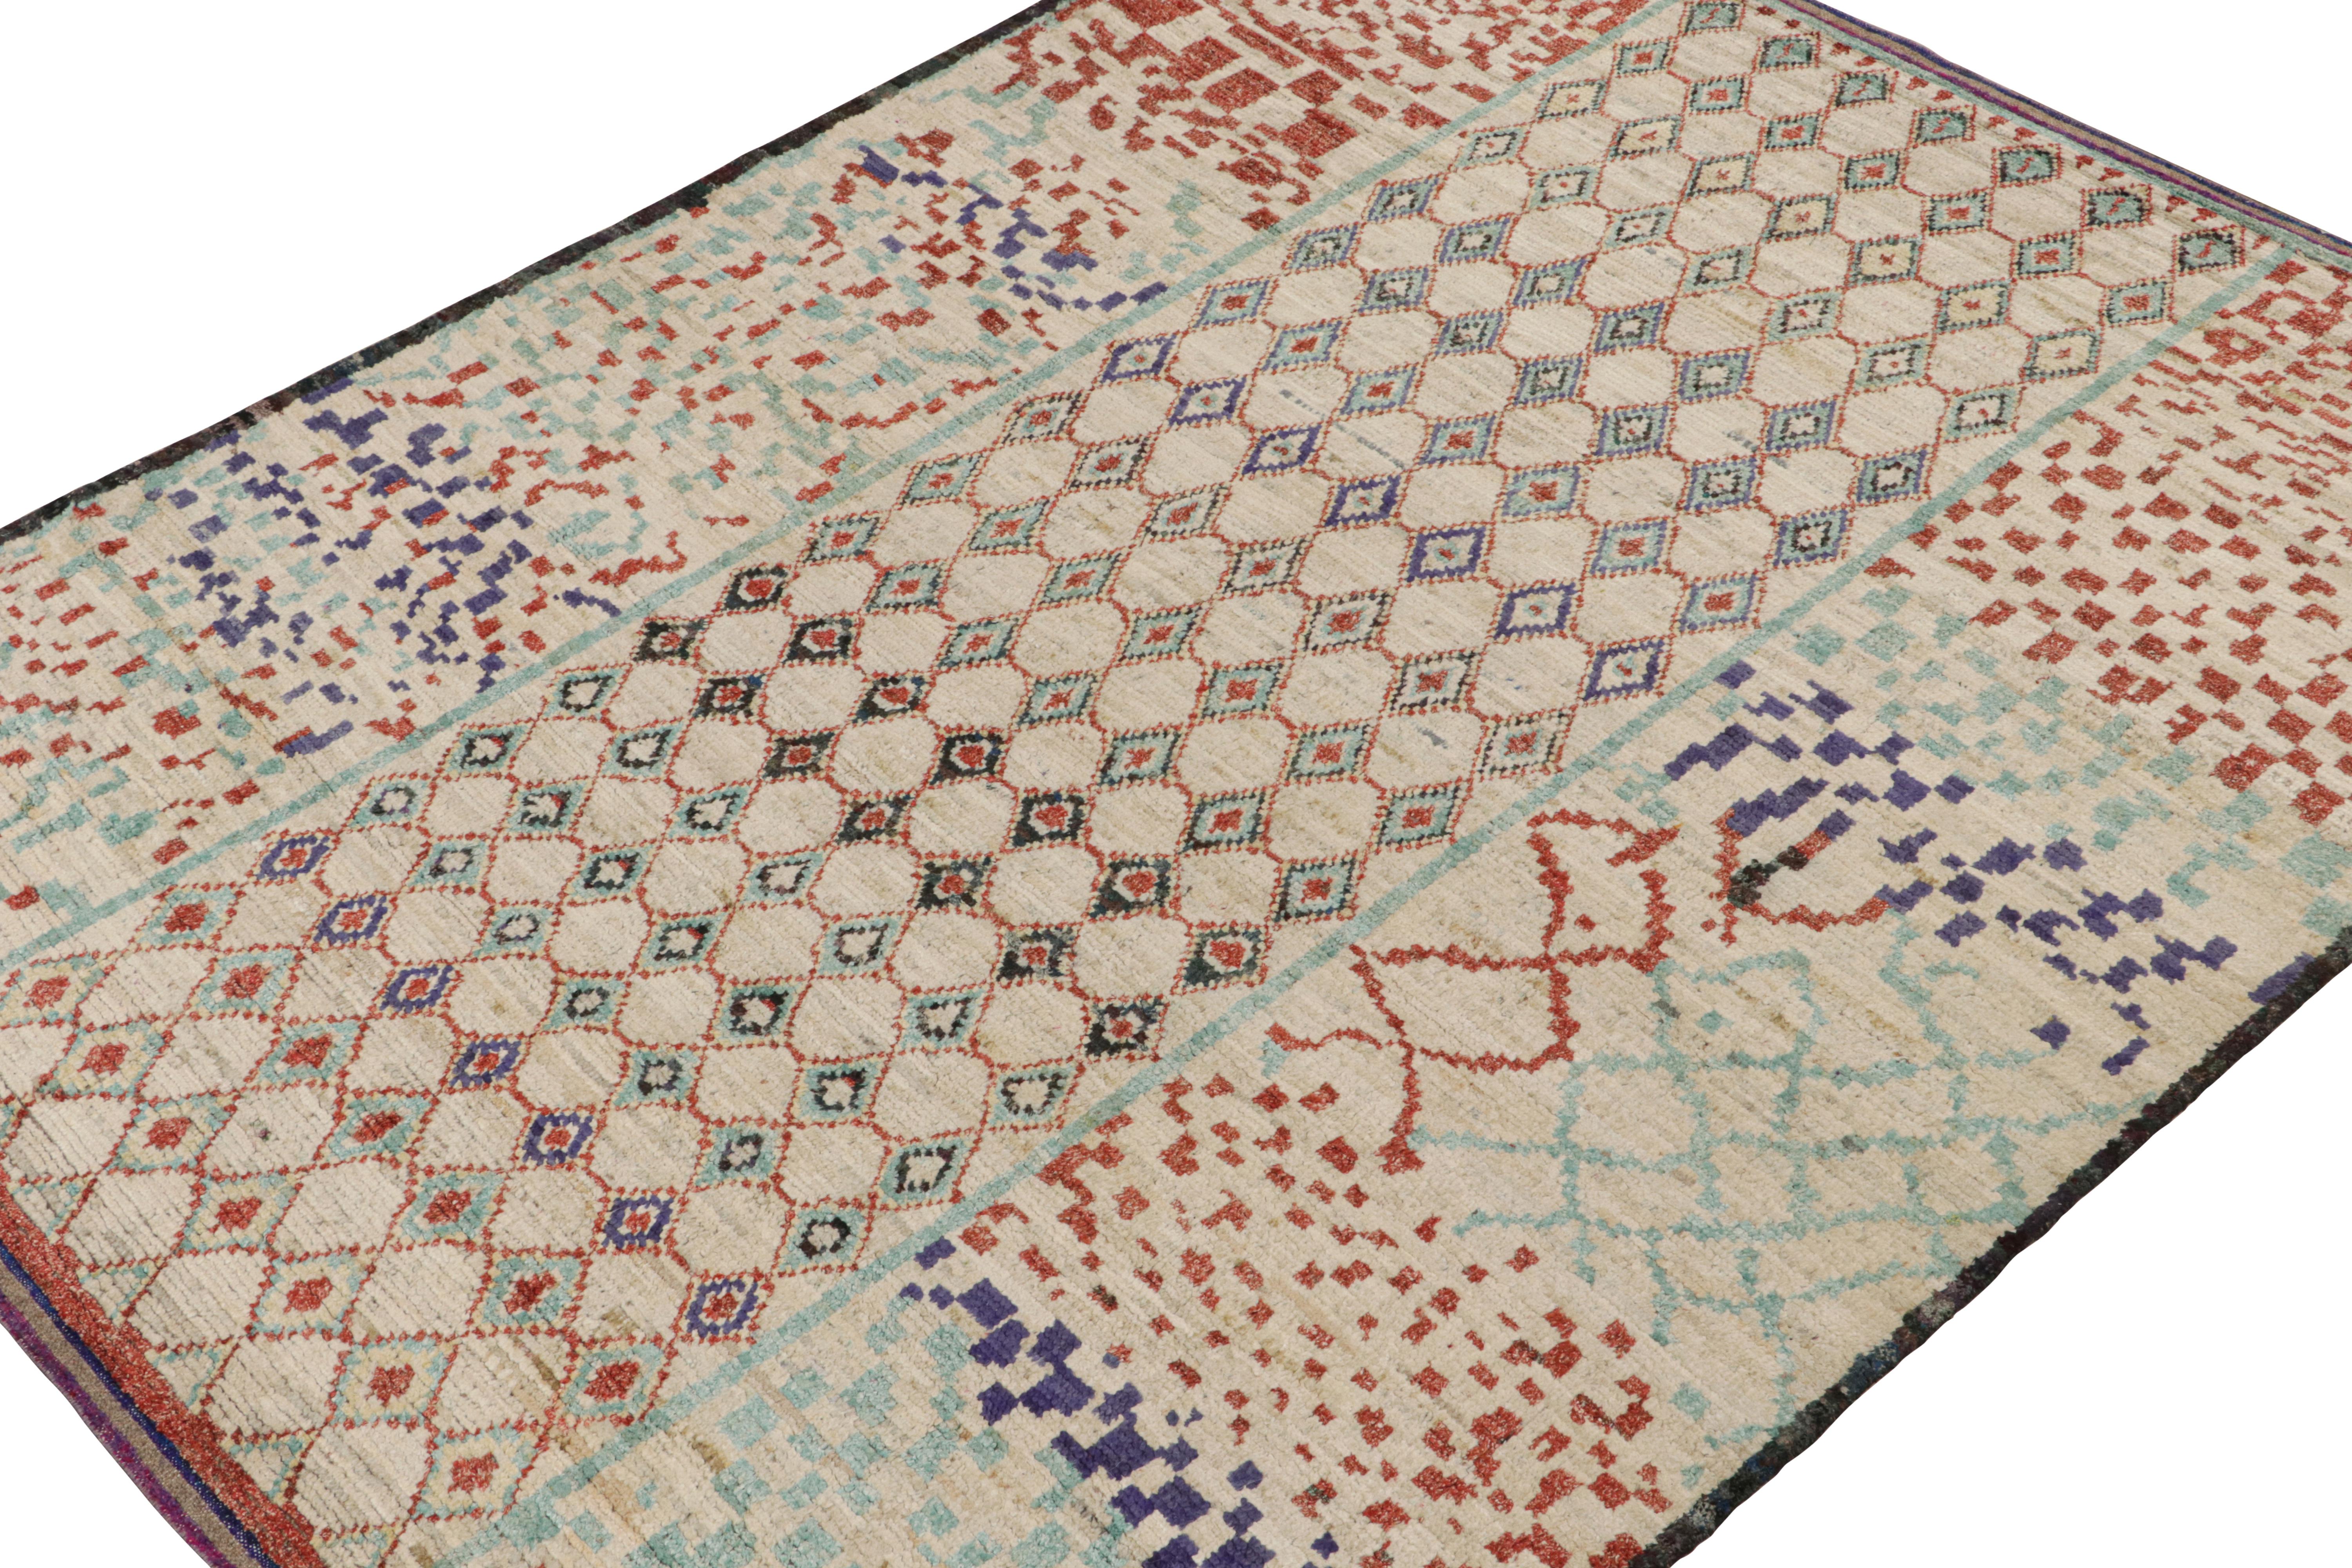 Hand-knotted in silk, this 8x10 rug is a new addition to the Moroccan Collection by Rug & Kilim. 

On the Design

This rug enjoys primitivist style with red & blue patterns on a beige backdrop. Connoisseurs will admire this as a modern take on the